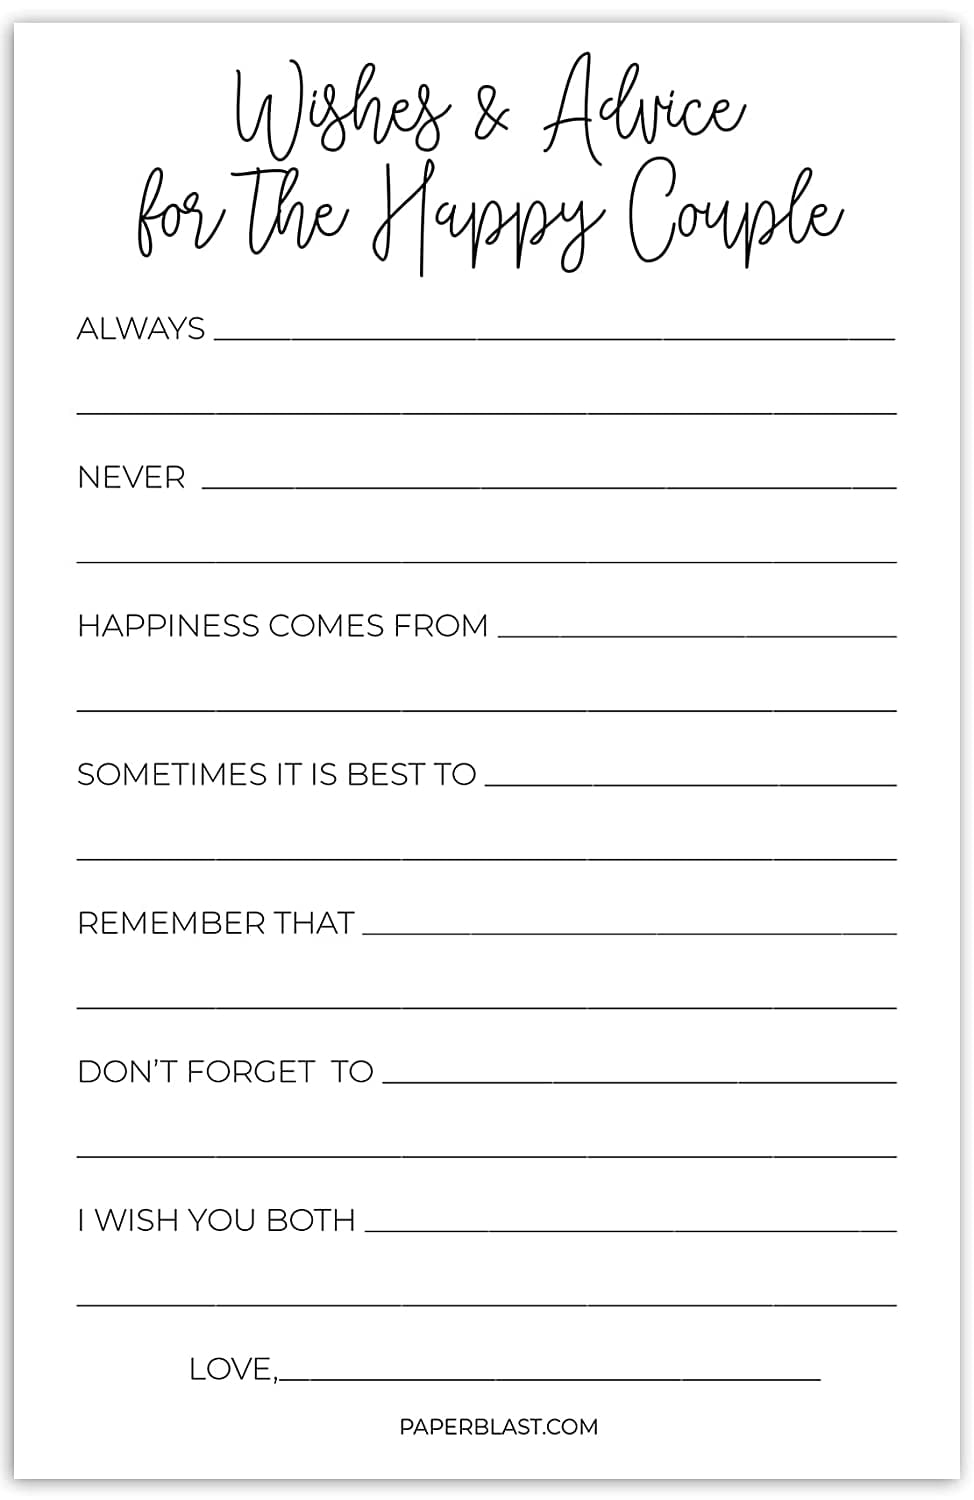 Wishes and Advice for the Happy Couple Minimalist Bridal Shower Game